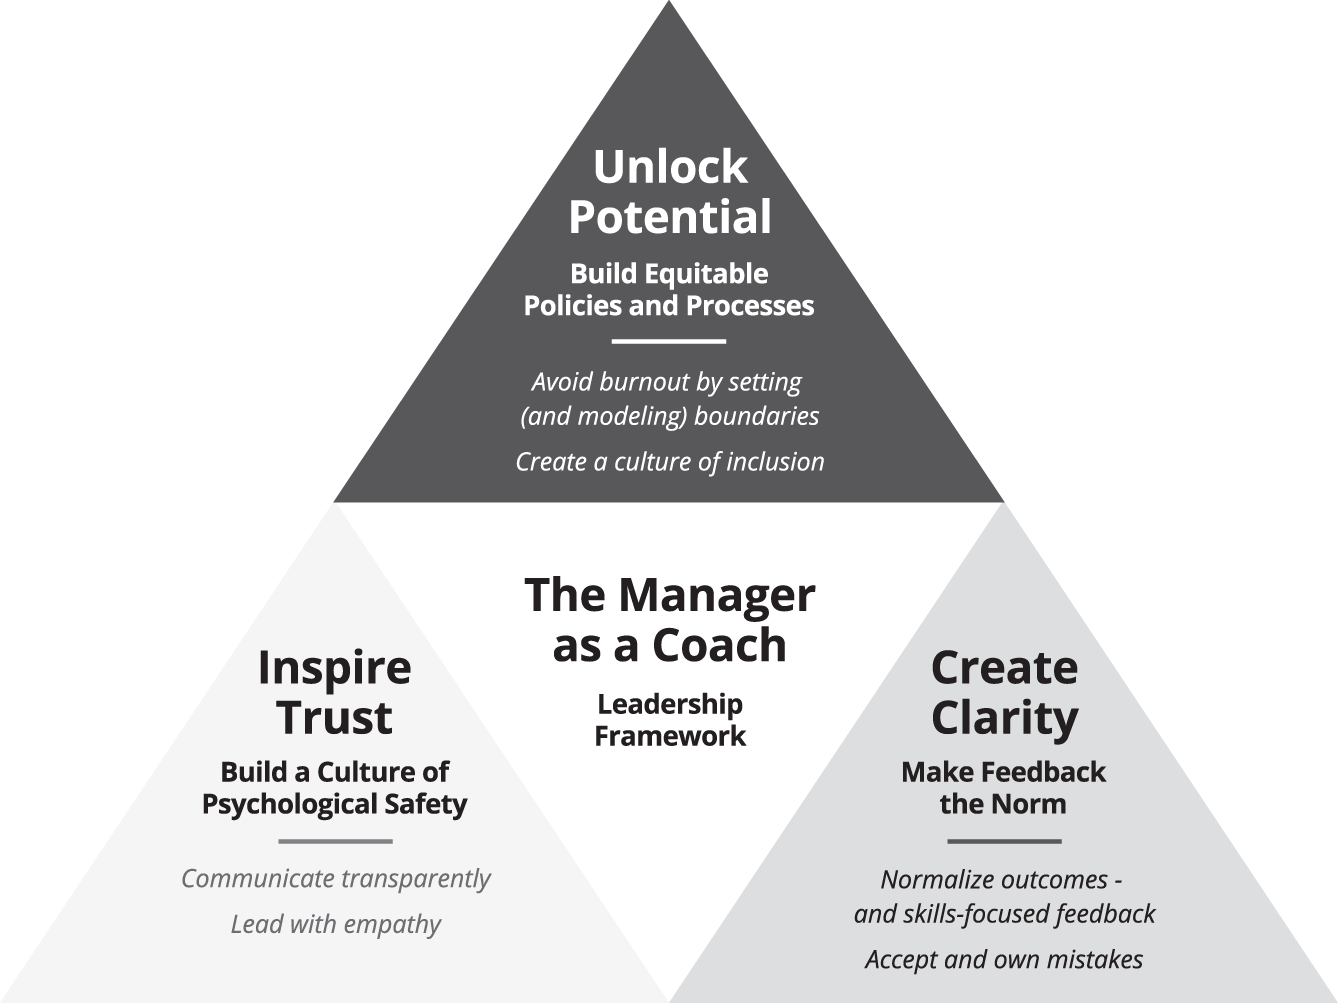 Schematic illustration of Tips to Inspire Trust, Create Clarity, and Unlock Potential on Your Team.